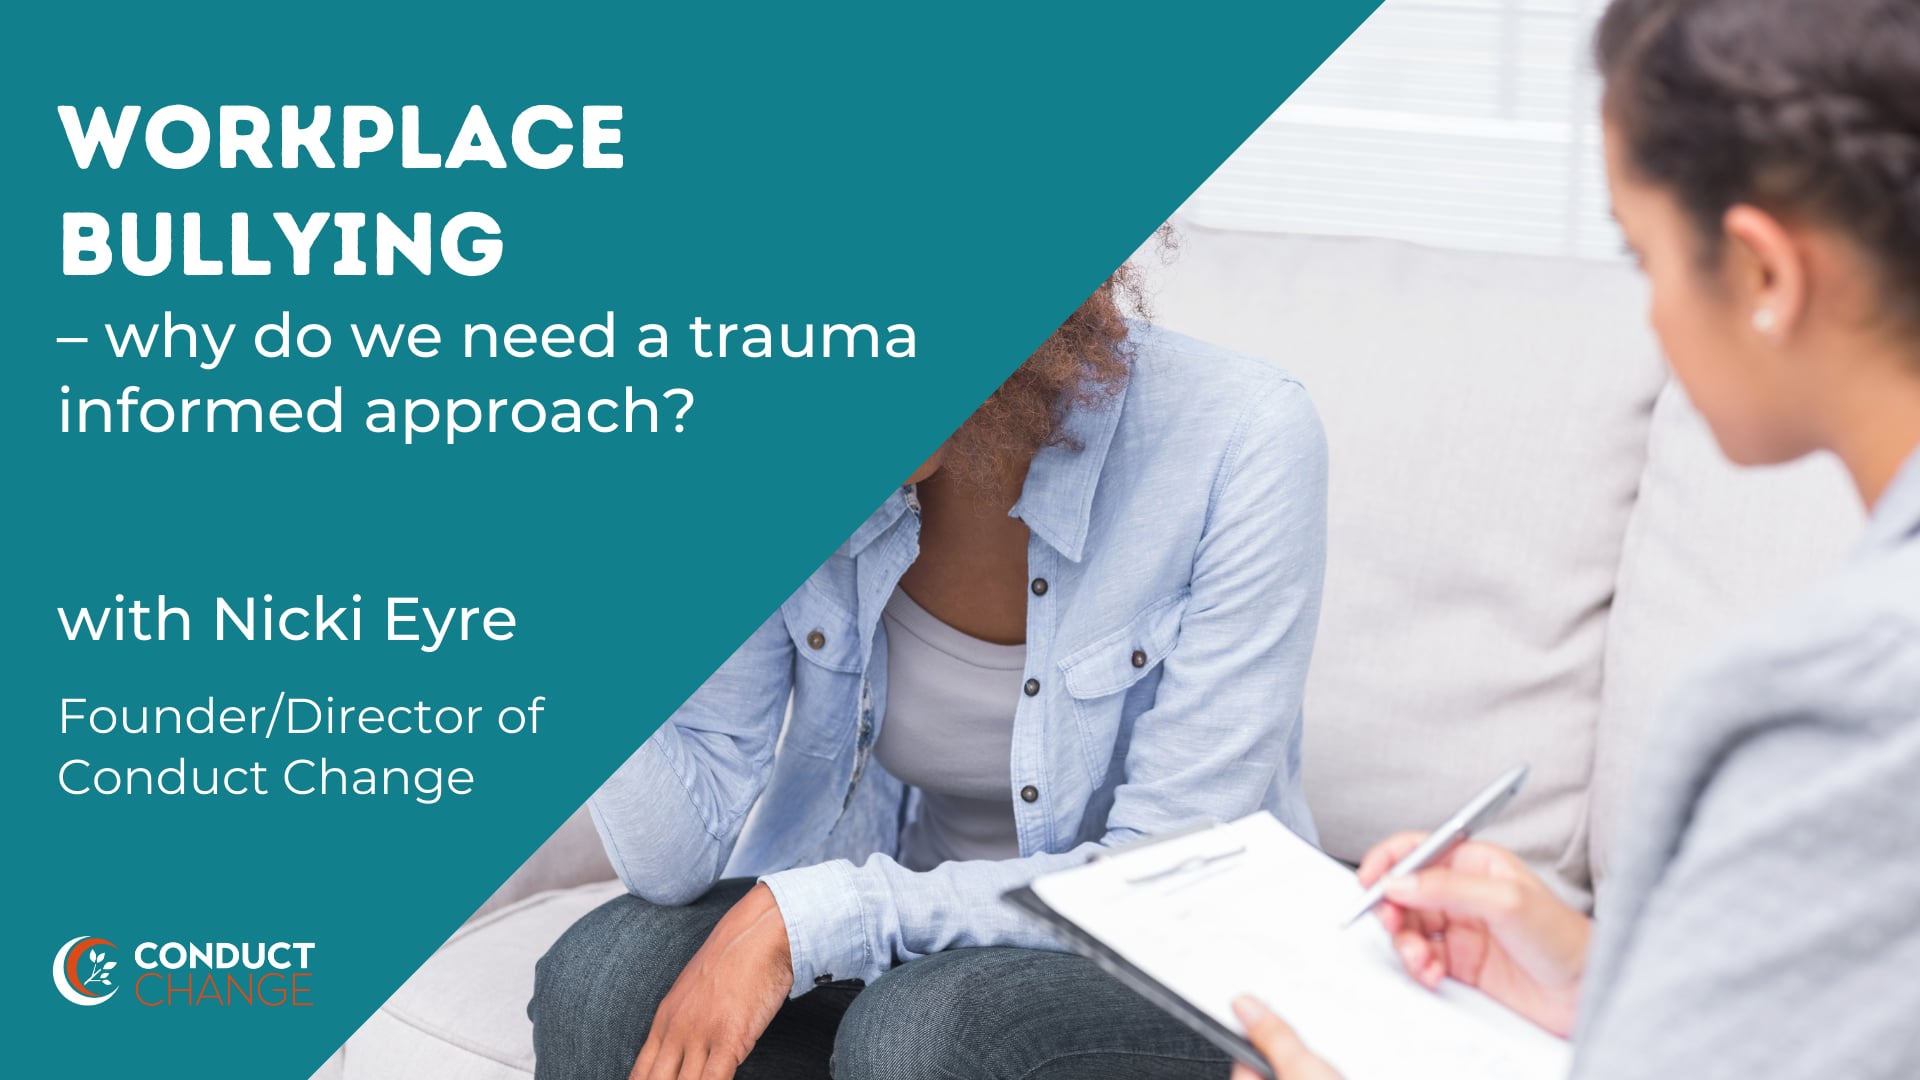 Workplace Bullying - why do we need a Trauma informed approach?